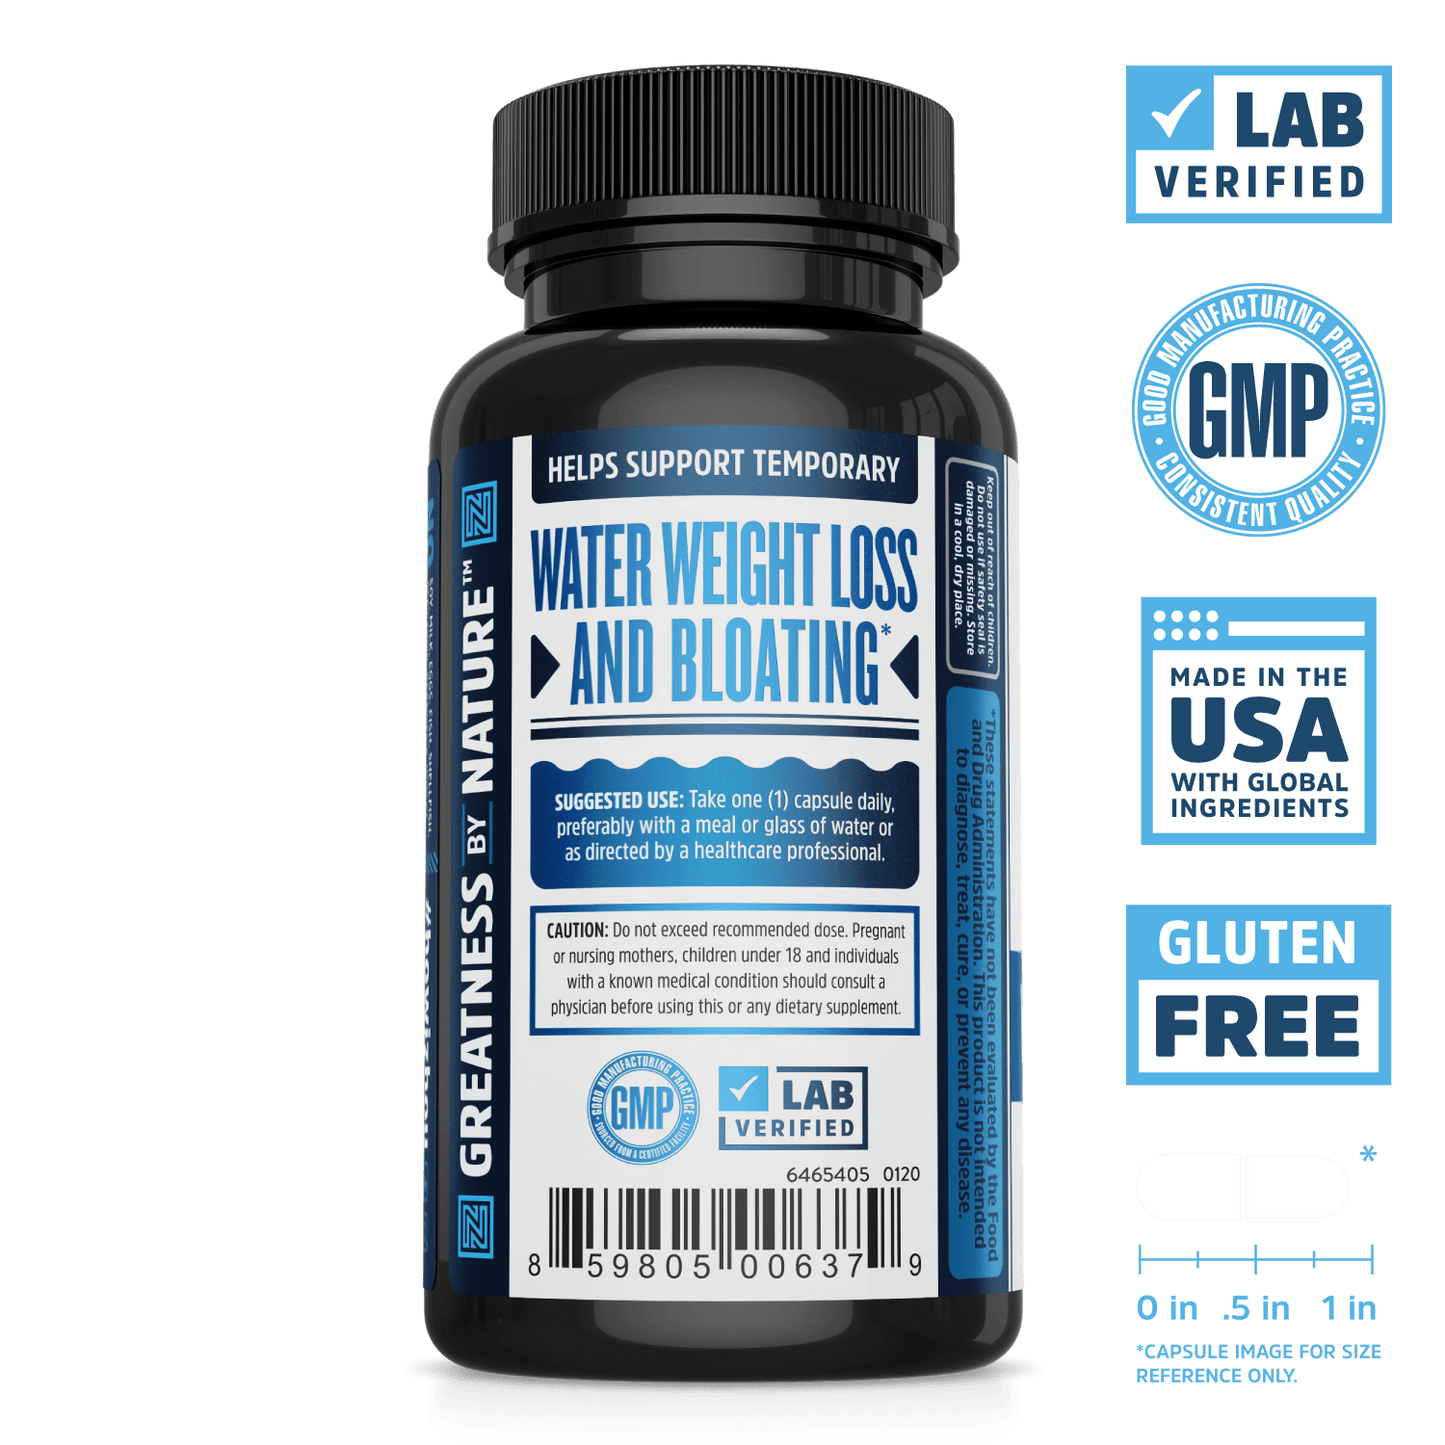 Zhou Nutrition Water Away bloating supplement. Bottle side. Lab verified, good manufacturing practices, made in the USA with global ingredients, gluten free.